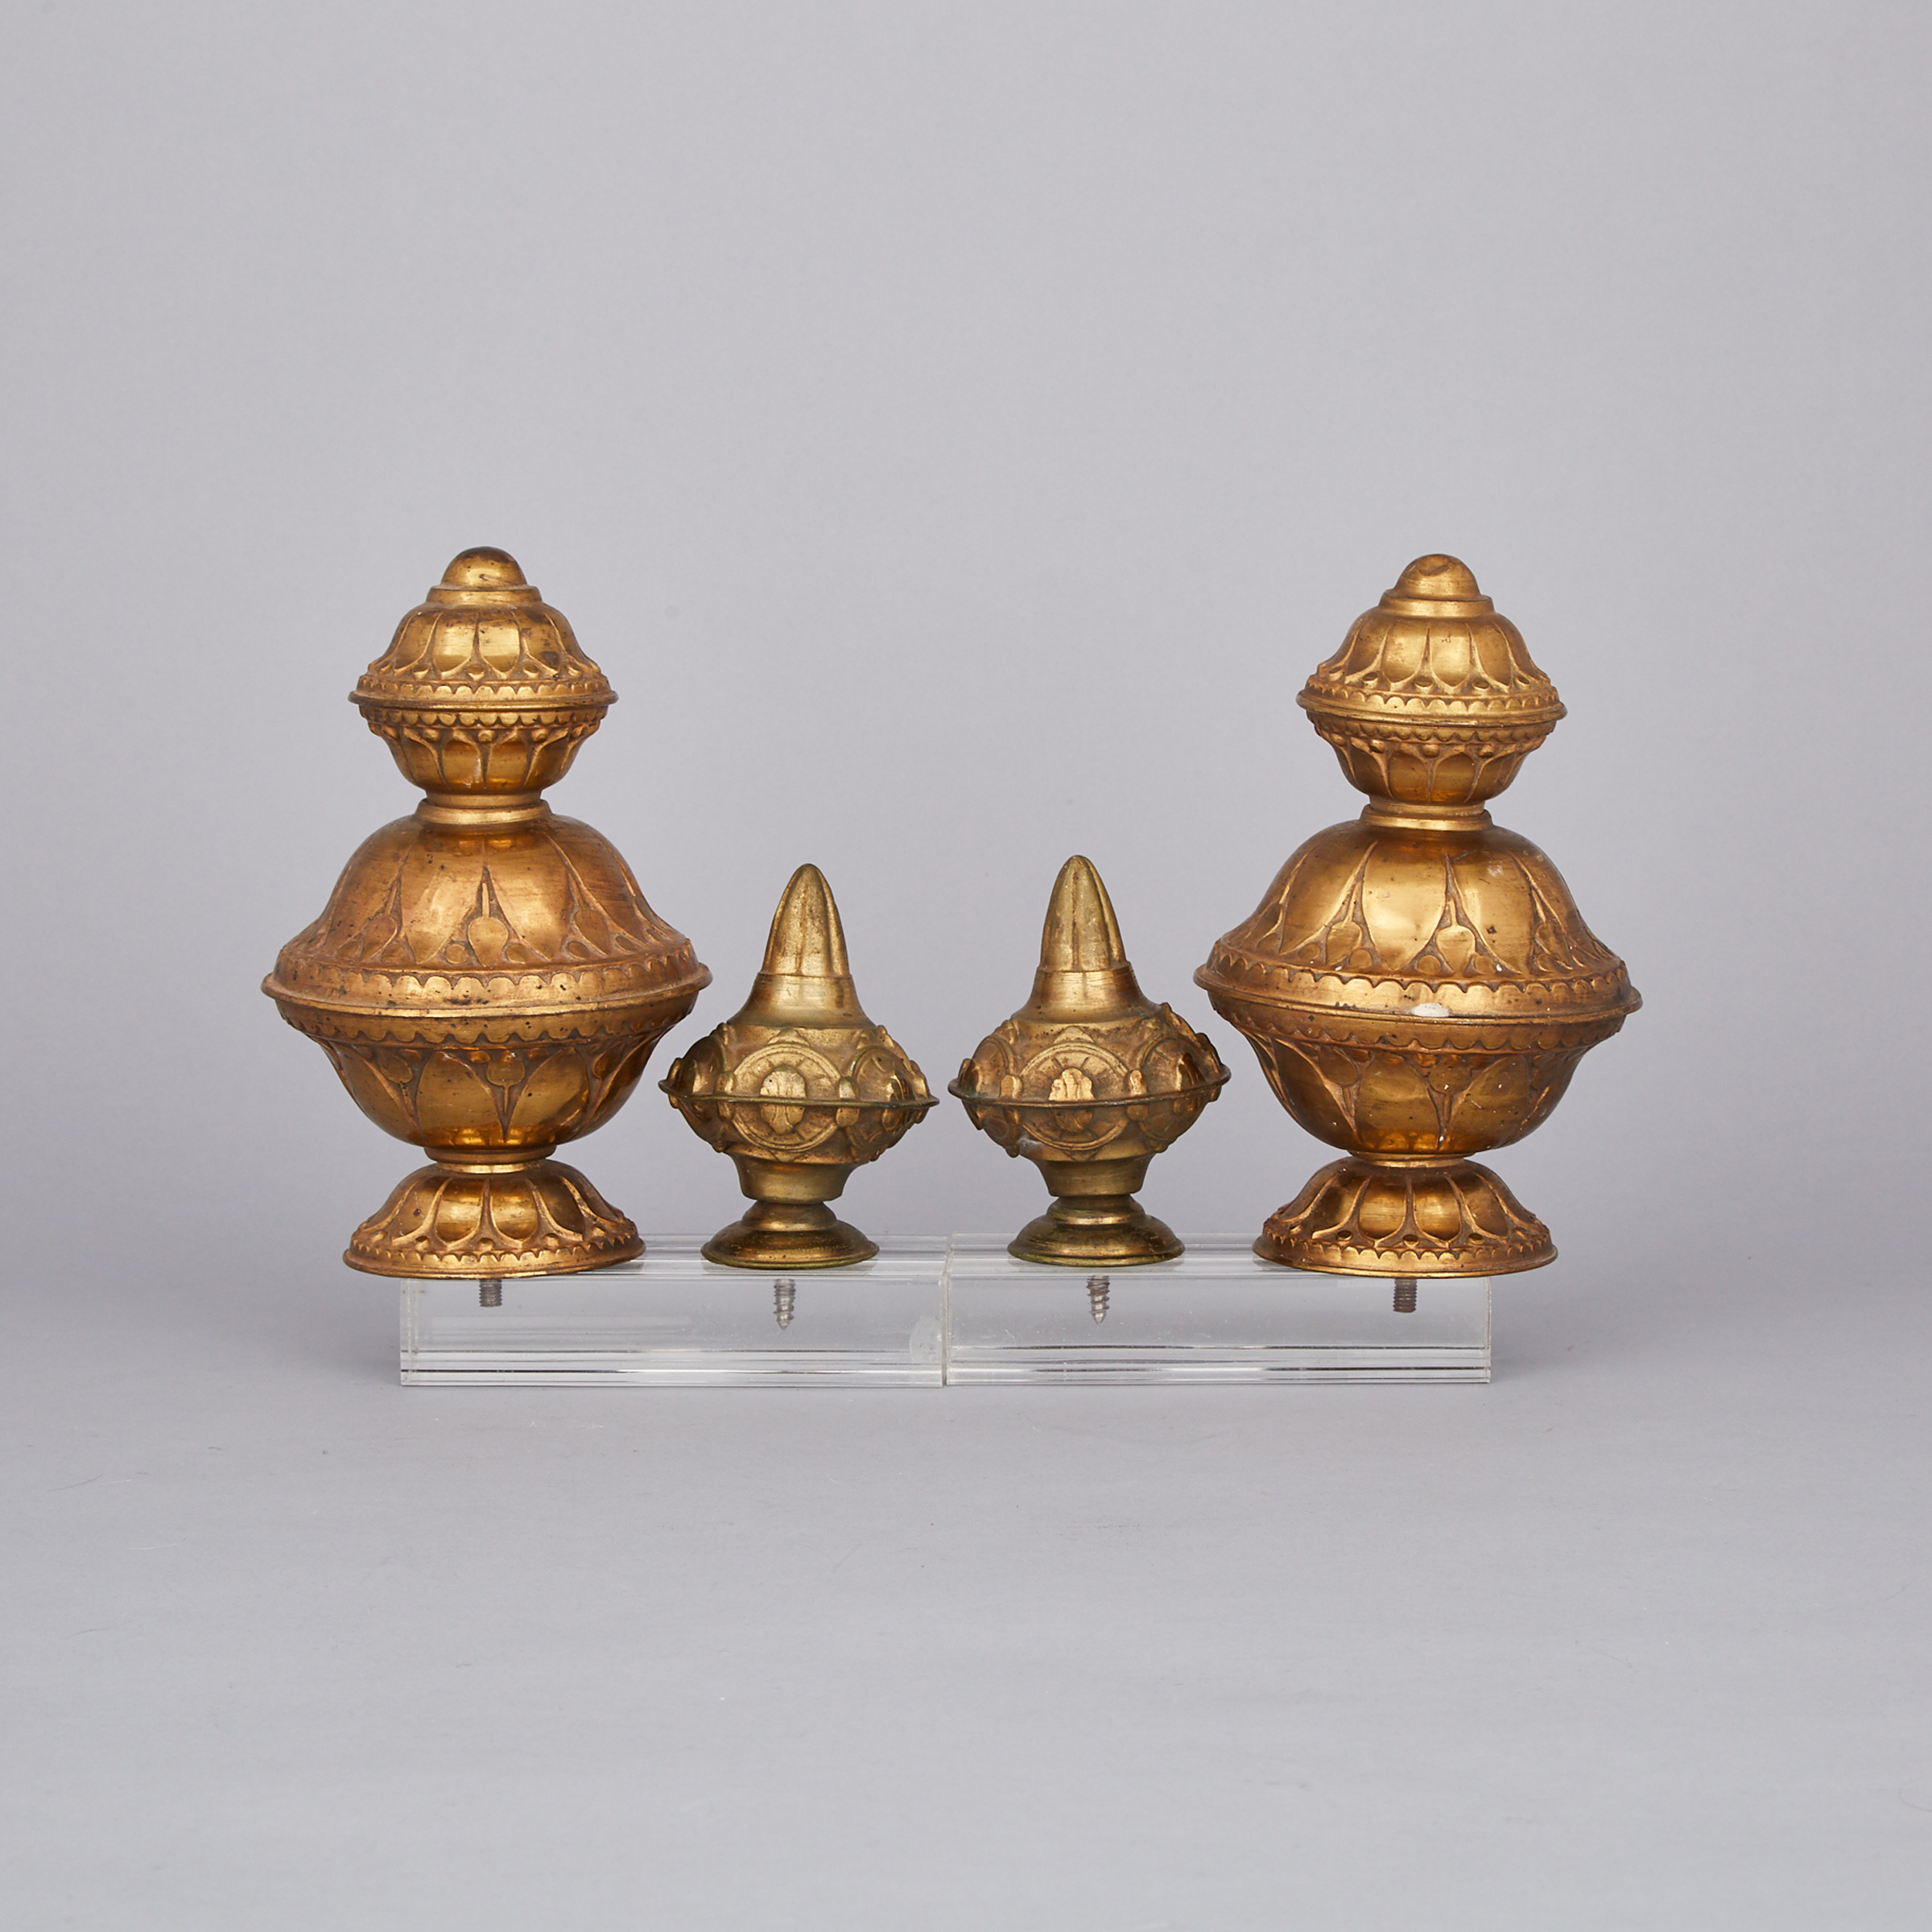 Two Pairs of Victorian Lacquered Pressed Brass Curtain Finials, mid 19th century